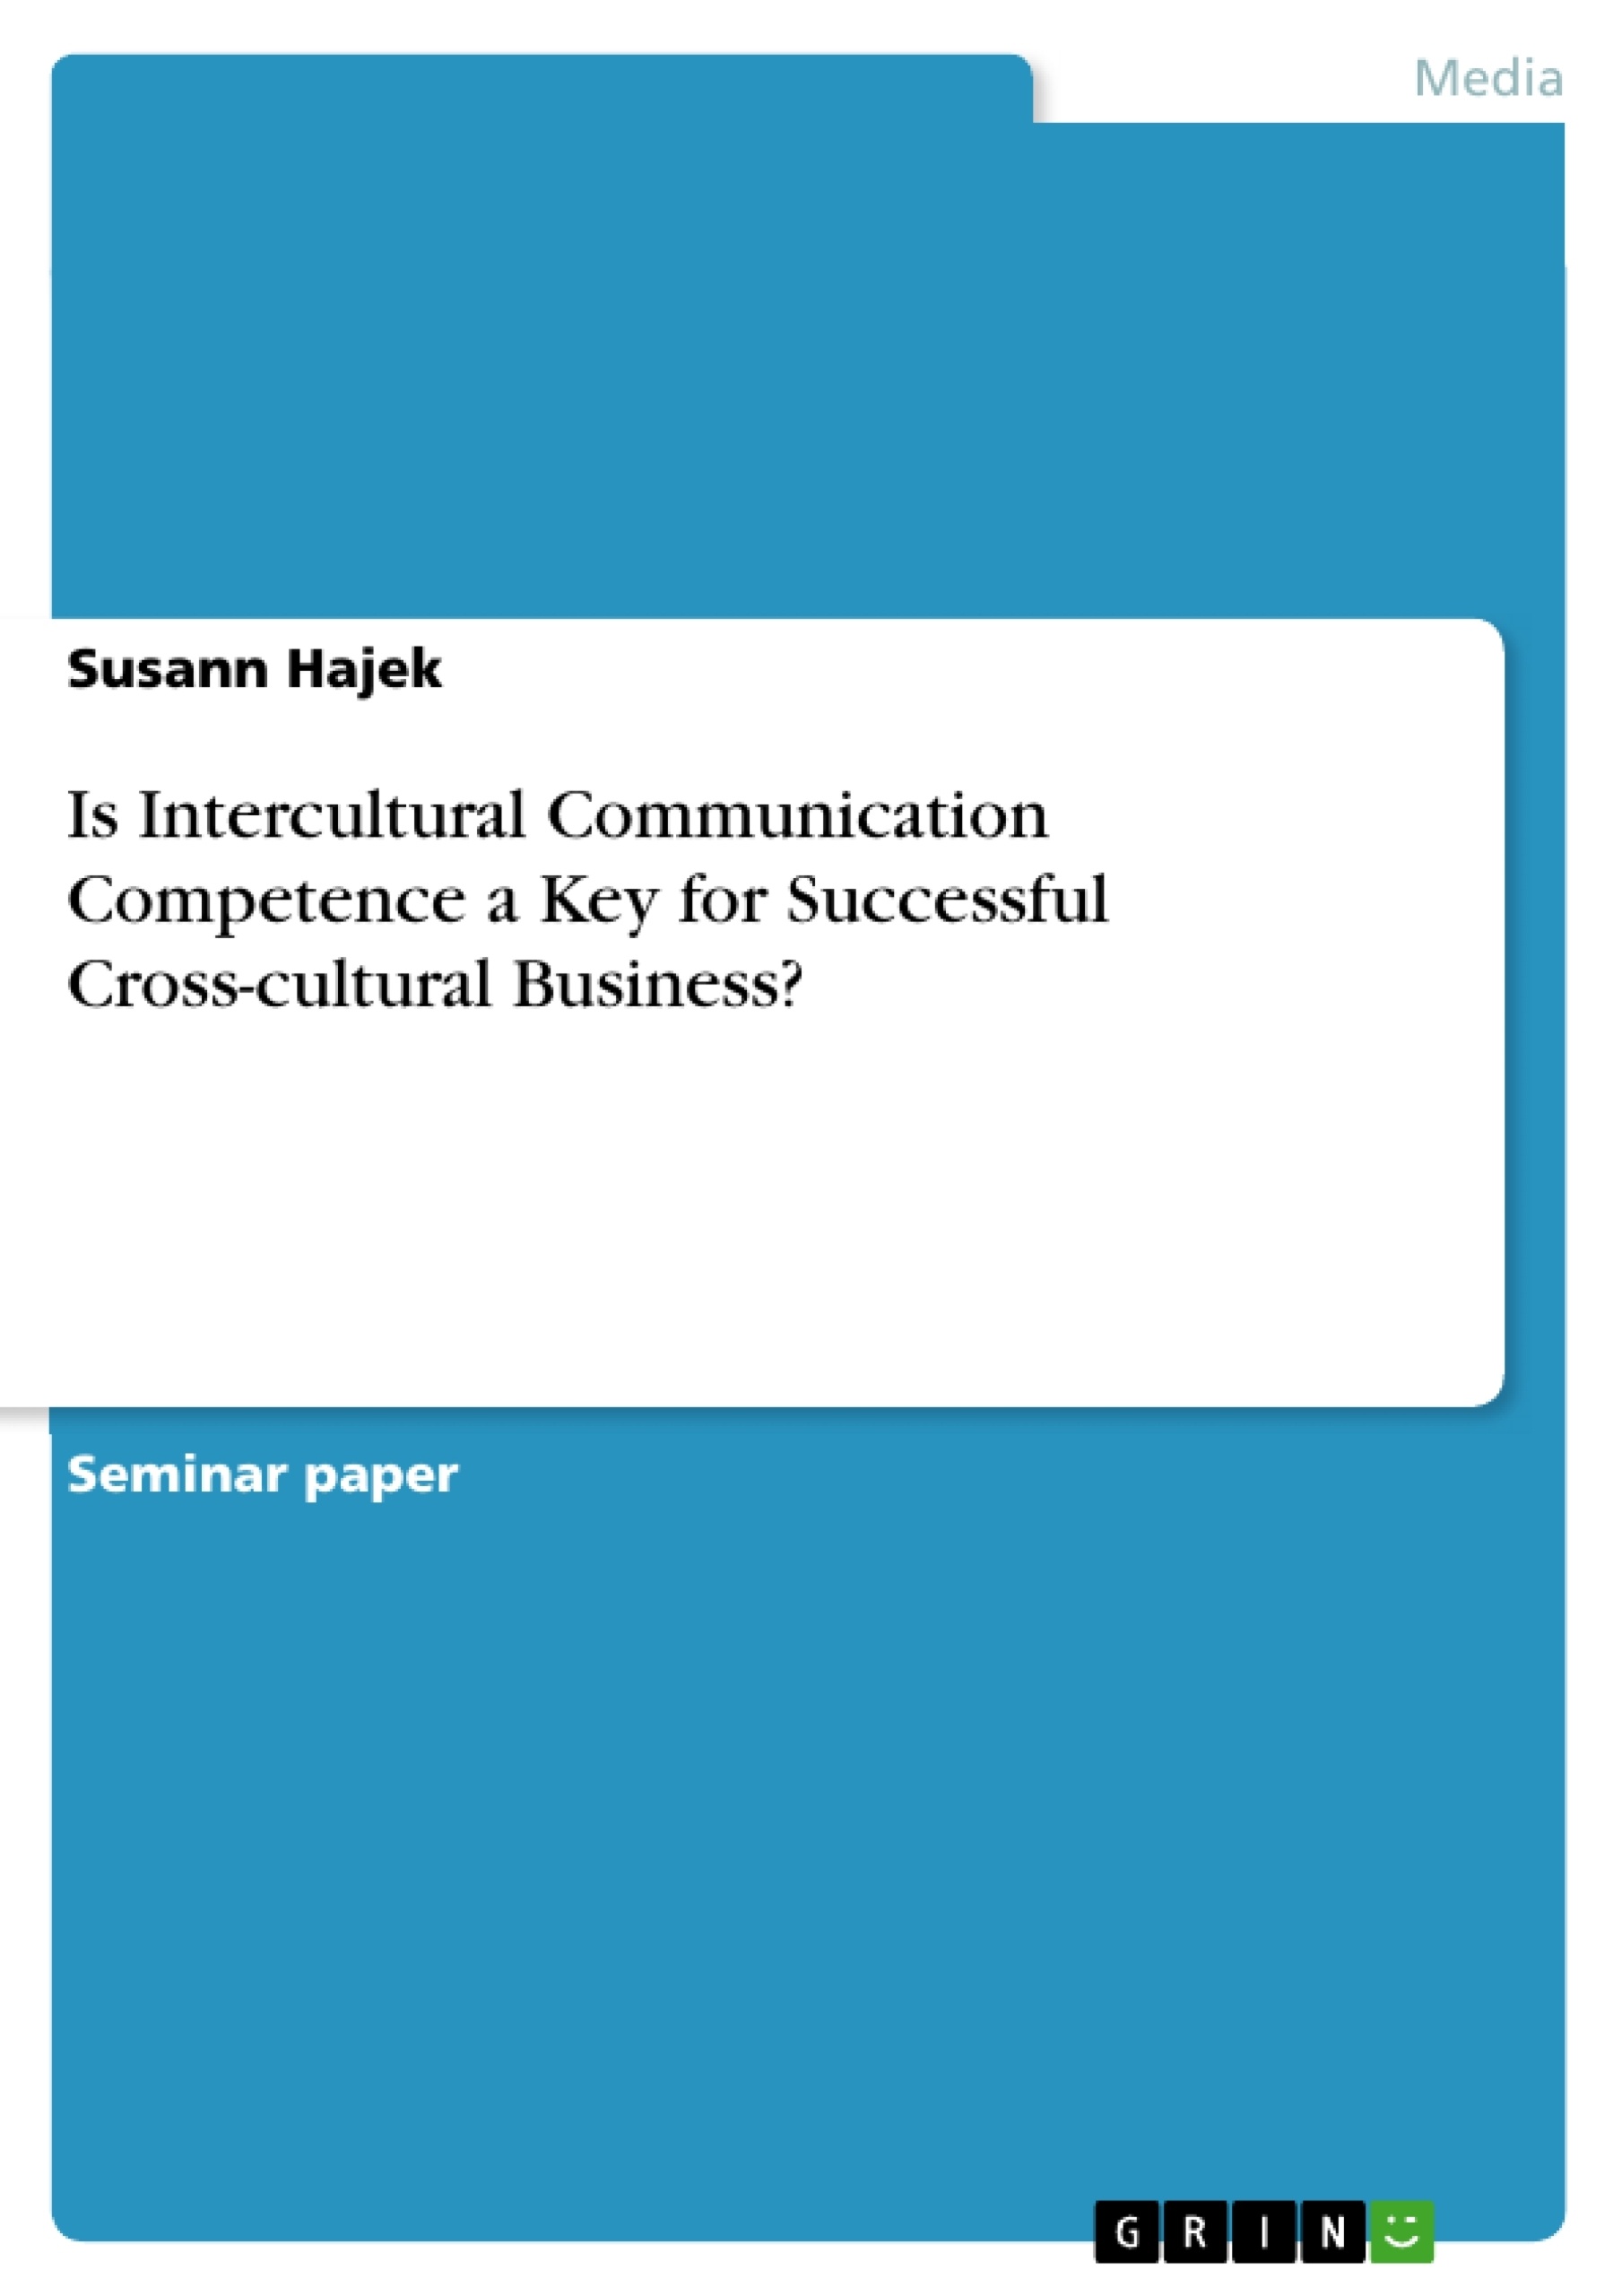 Título: Is Intercultural Communication Competence a Key for Successful Cross-cultural Business?